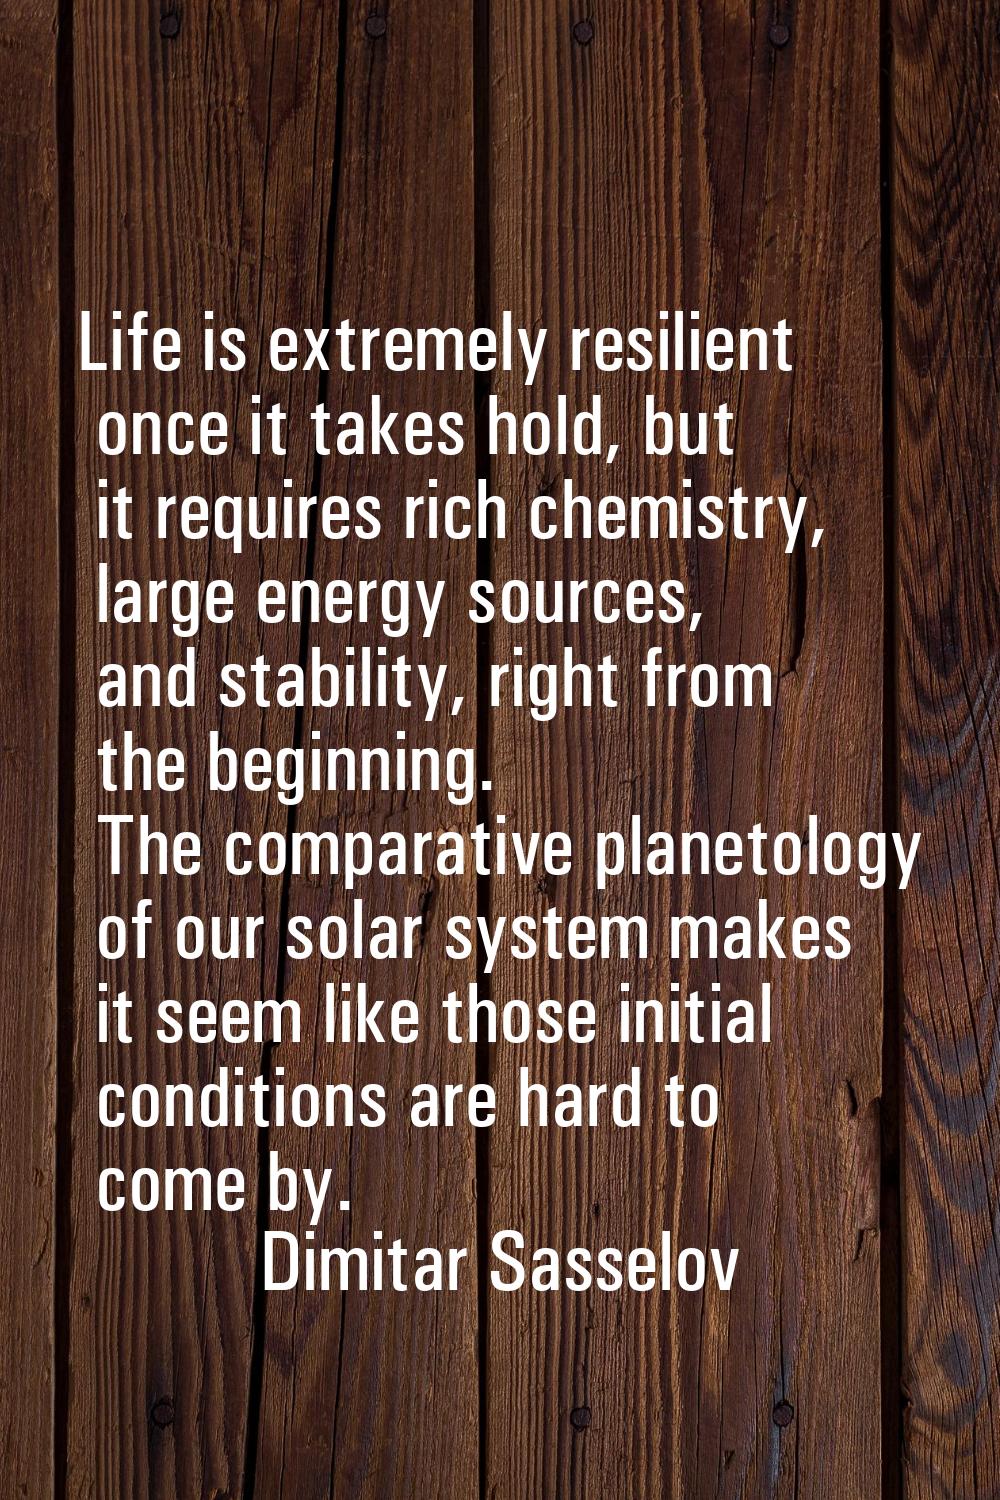 Life is extremely resilient once it takes hold, but it requires rich chemistry, large energy source